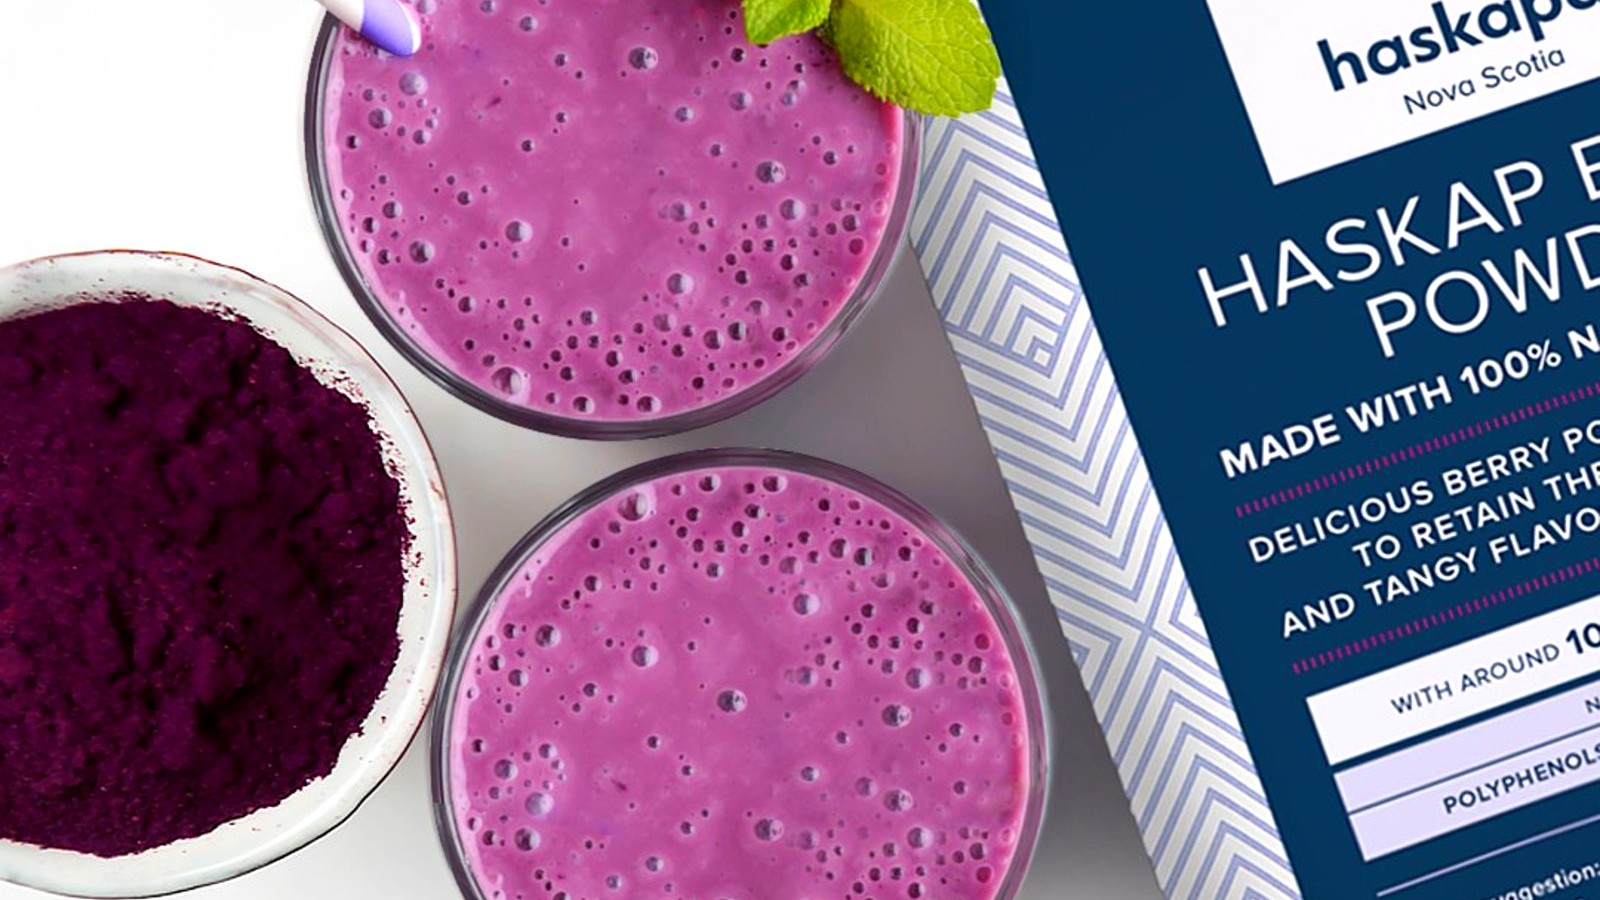 Image of HASKAPA HEALTHY MORNING SMOOTHIE - RICH IN ANTHOCYANINS